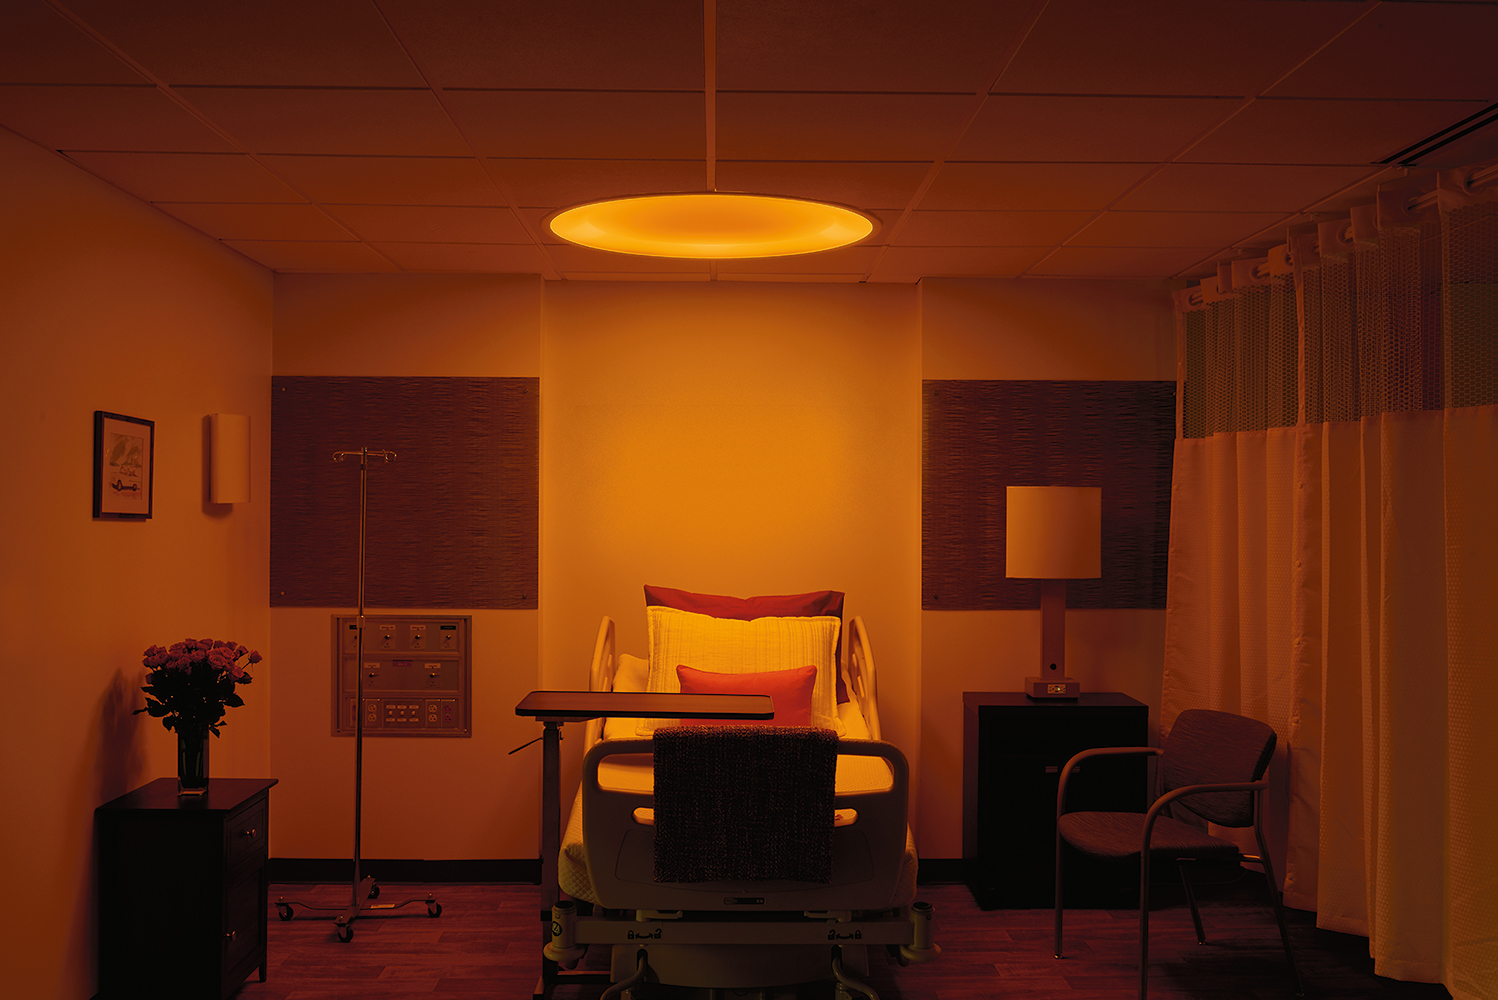 Symmetry patient room lighting fixture, a large, round overbed luminaire, in its amber night light mode.